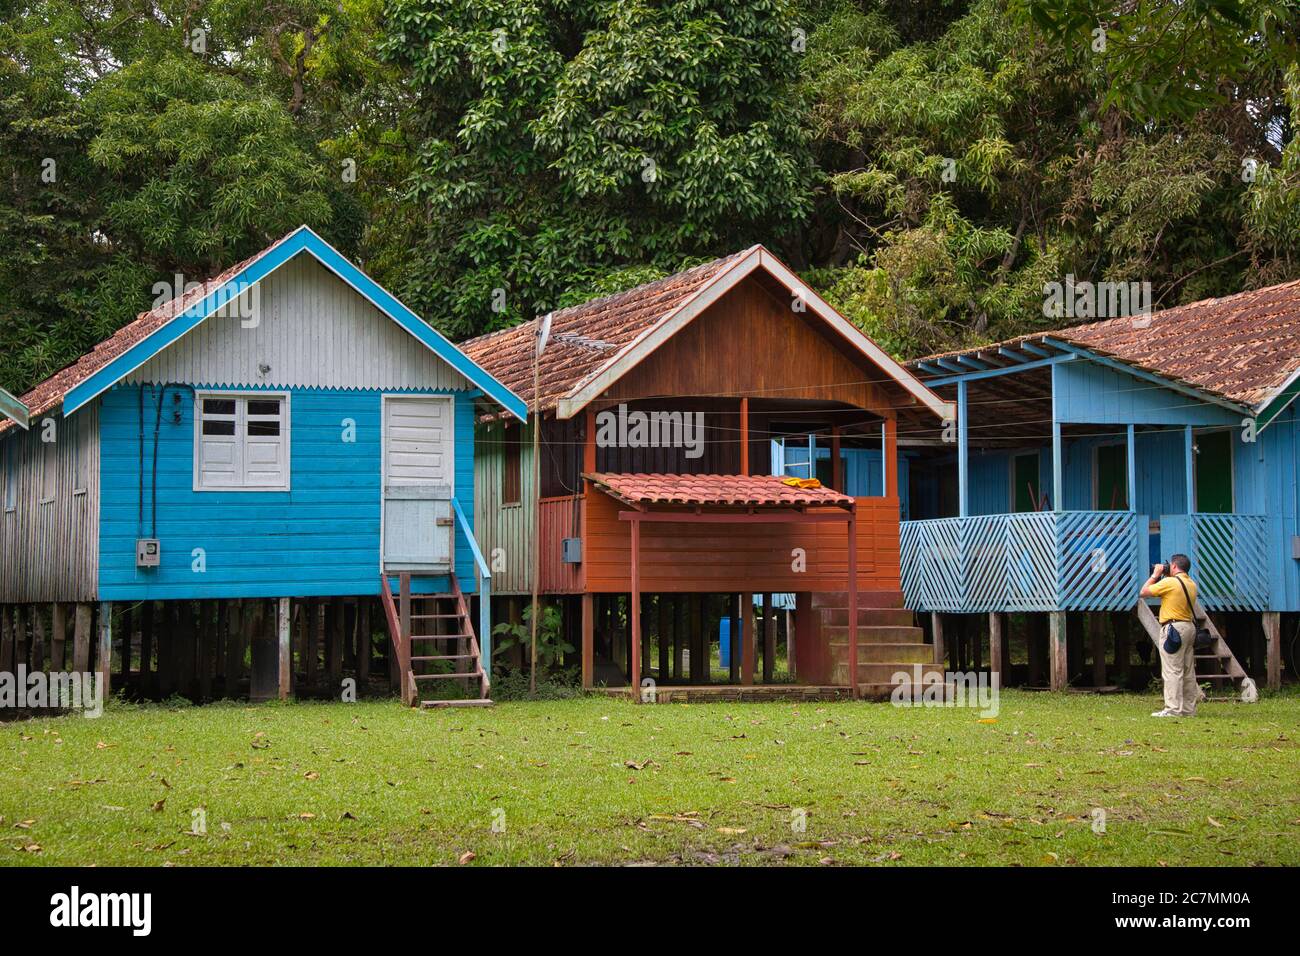 Three village huts on stilts for when the Amazon River floods, with visitor taking a photograph, near Manaus in Amazonas State, Brazil Stock Photo